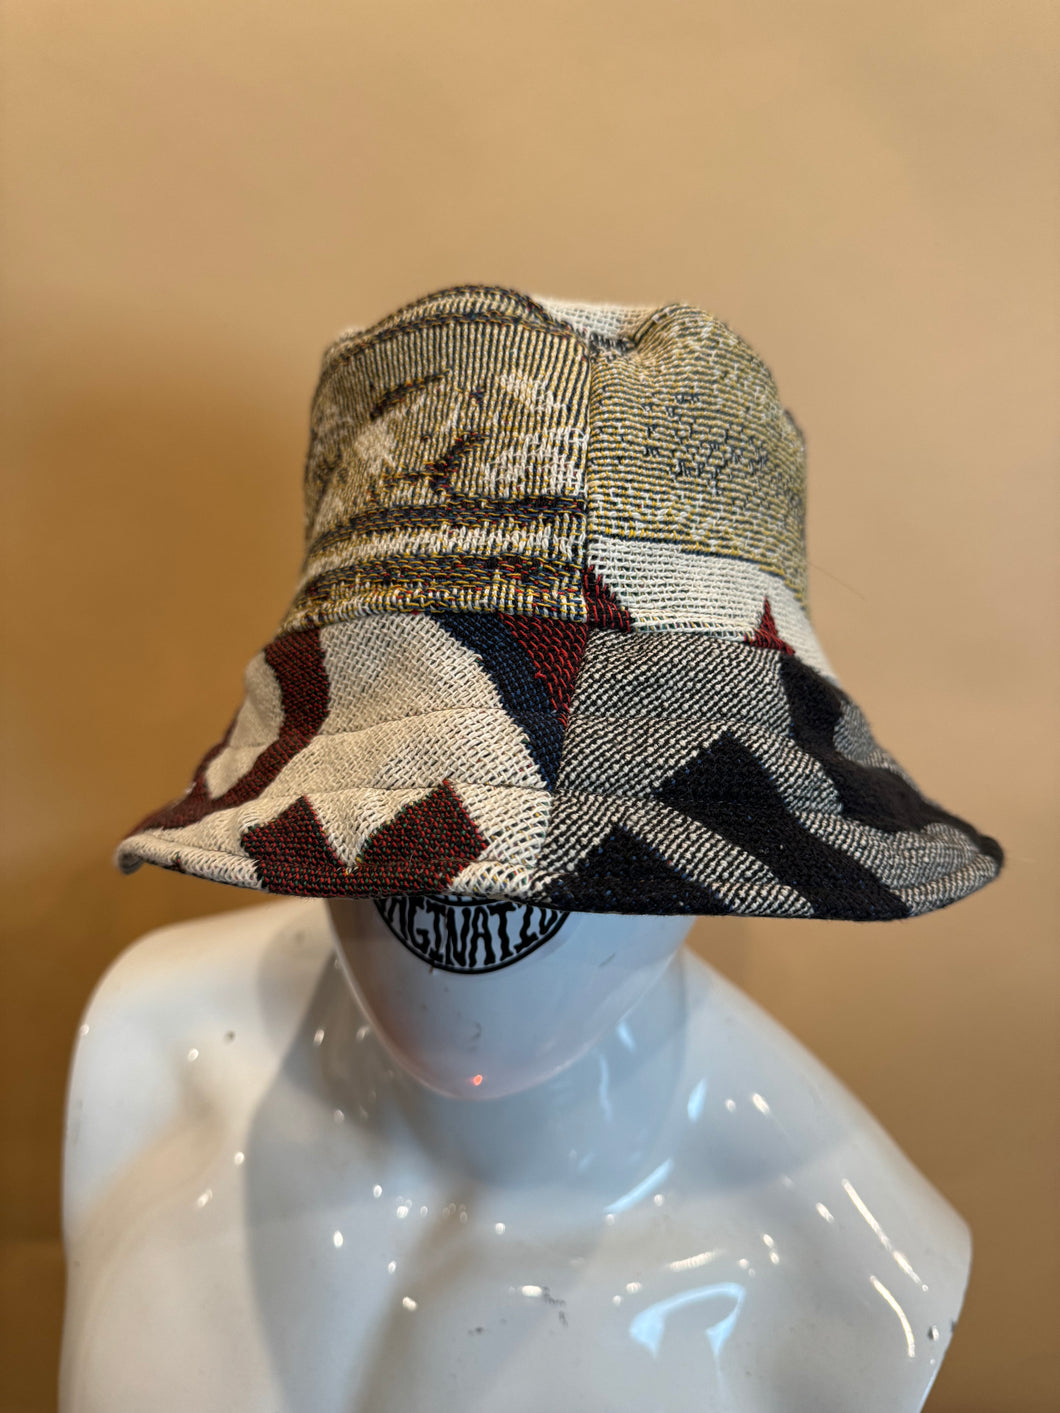 Abstract Bucket Hat